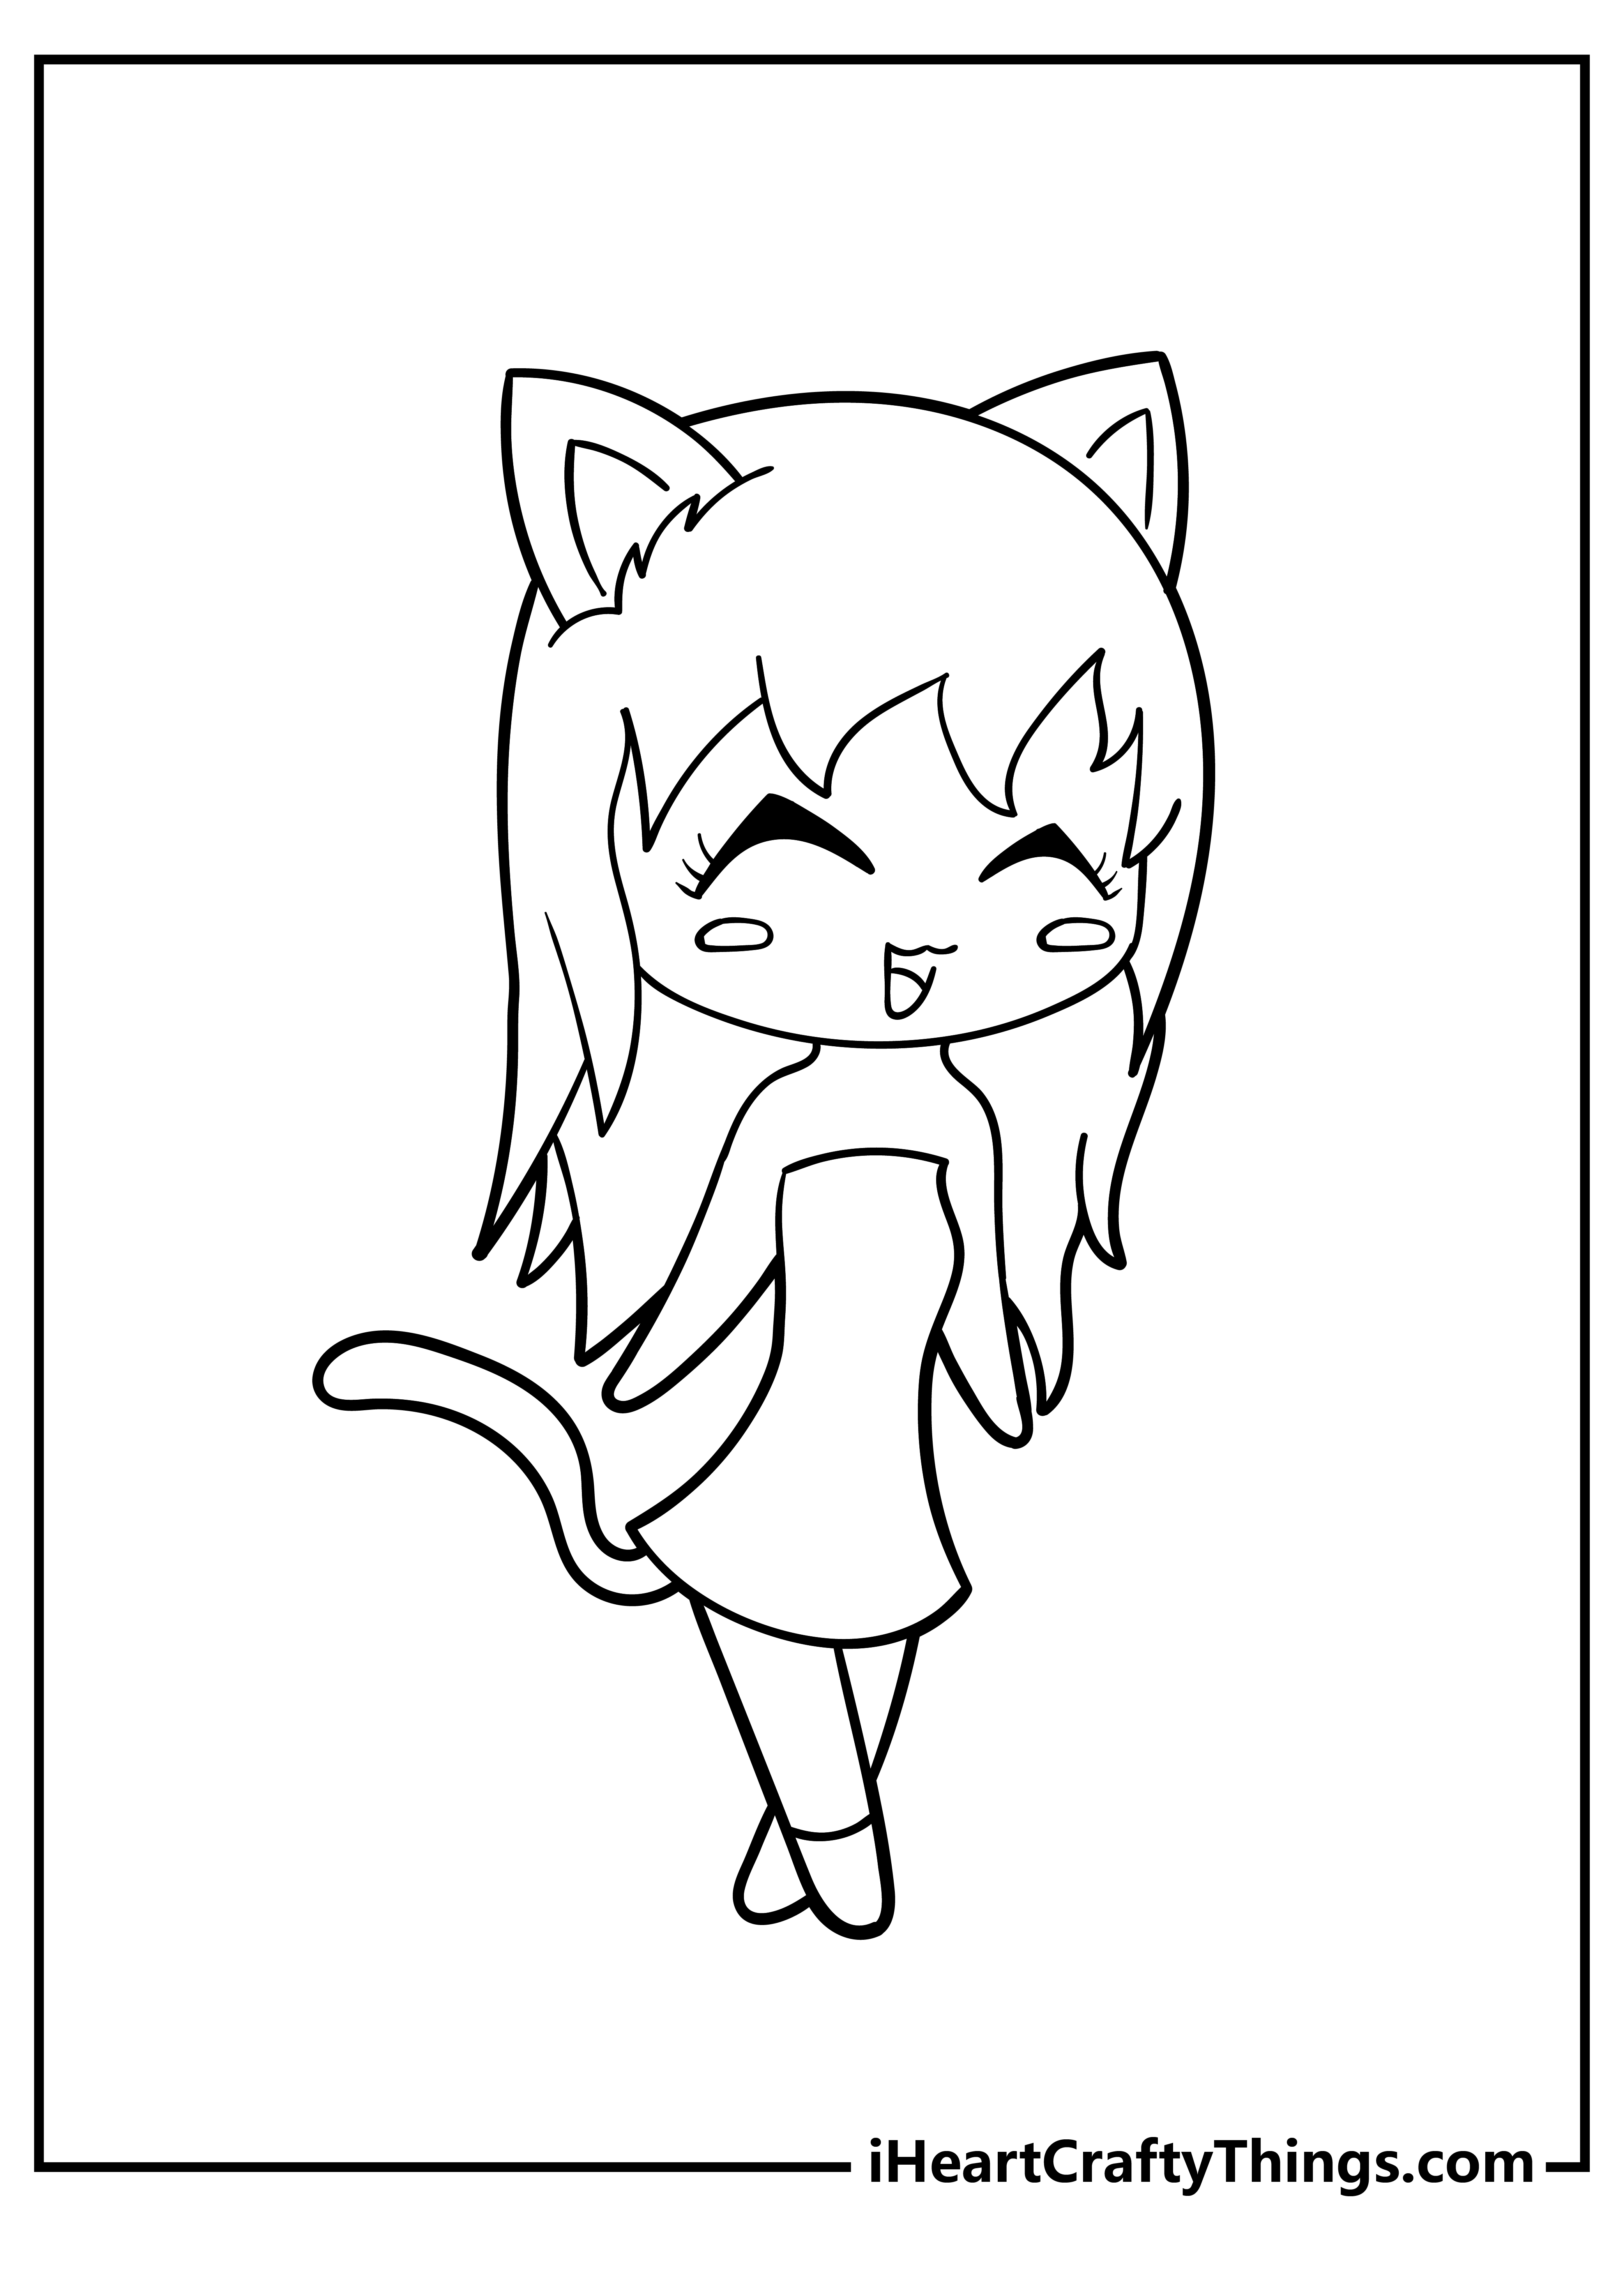 Printable Cute Coloring Pages For Girls Updated 20